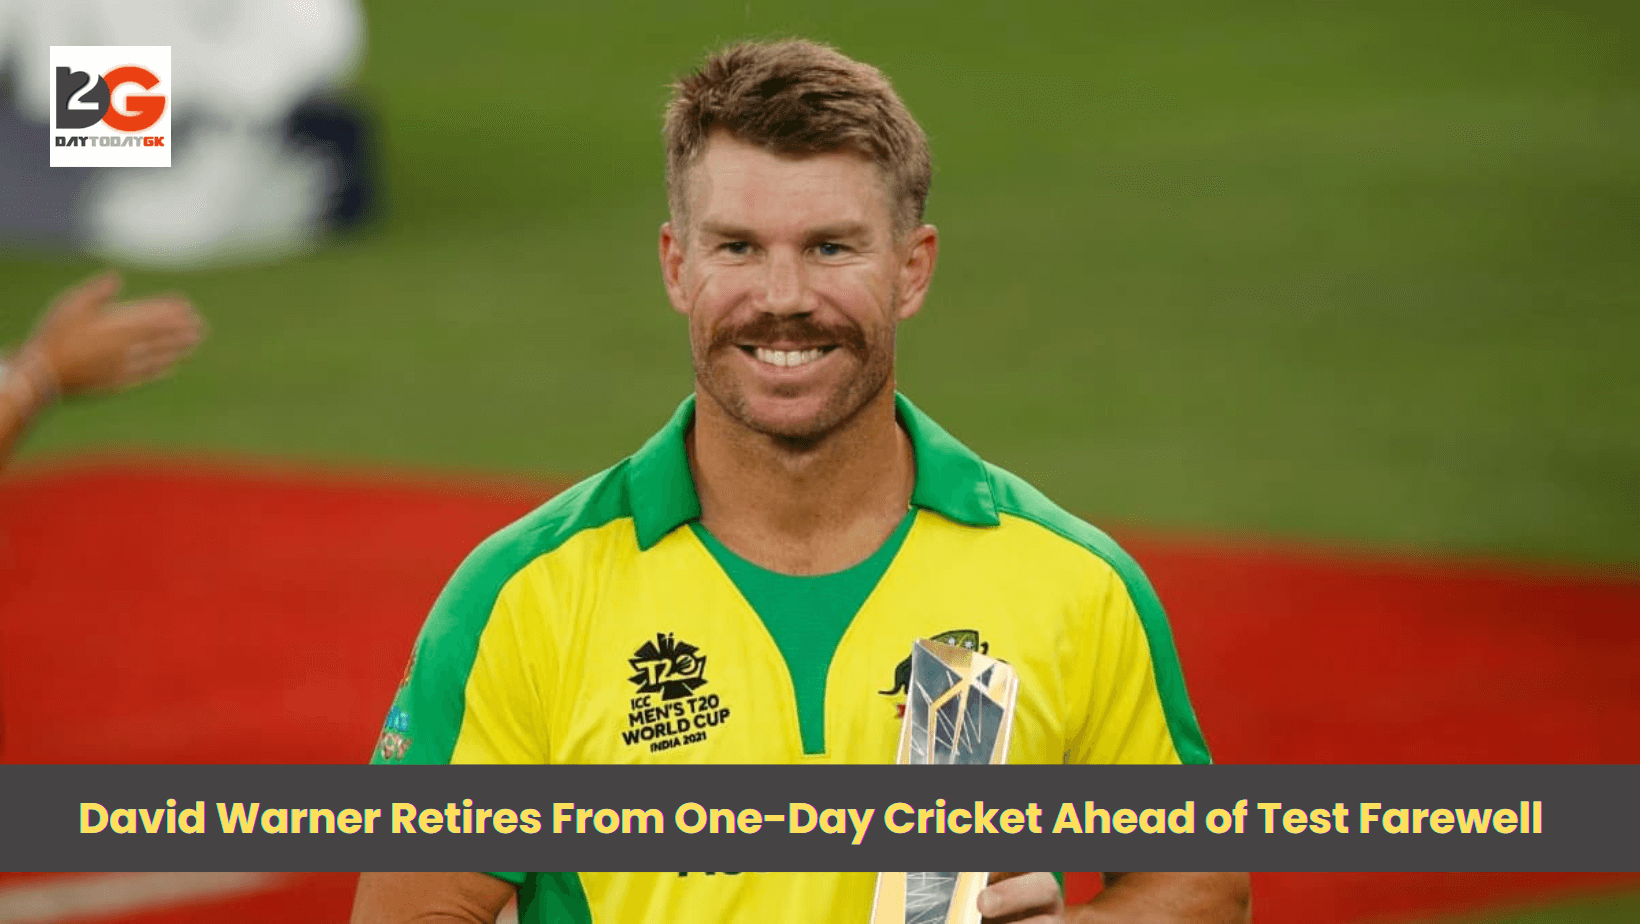 David Warner Retires From One-Day Cricket Ahead of Test Farewell